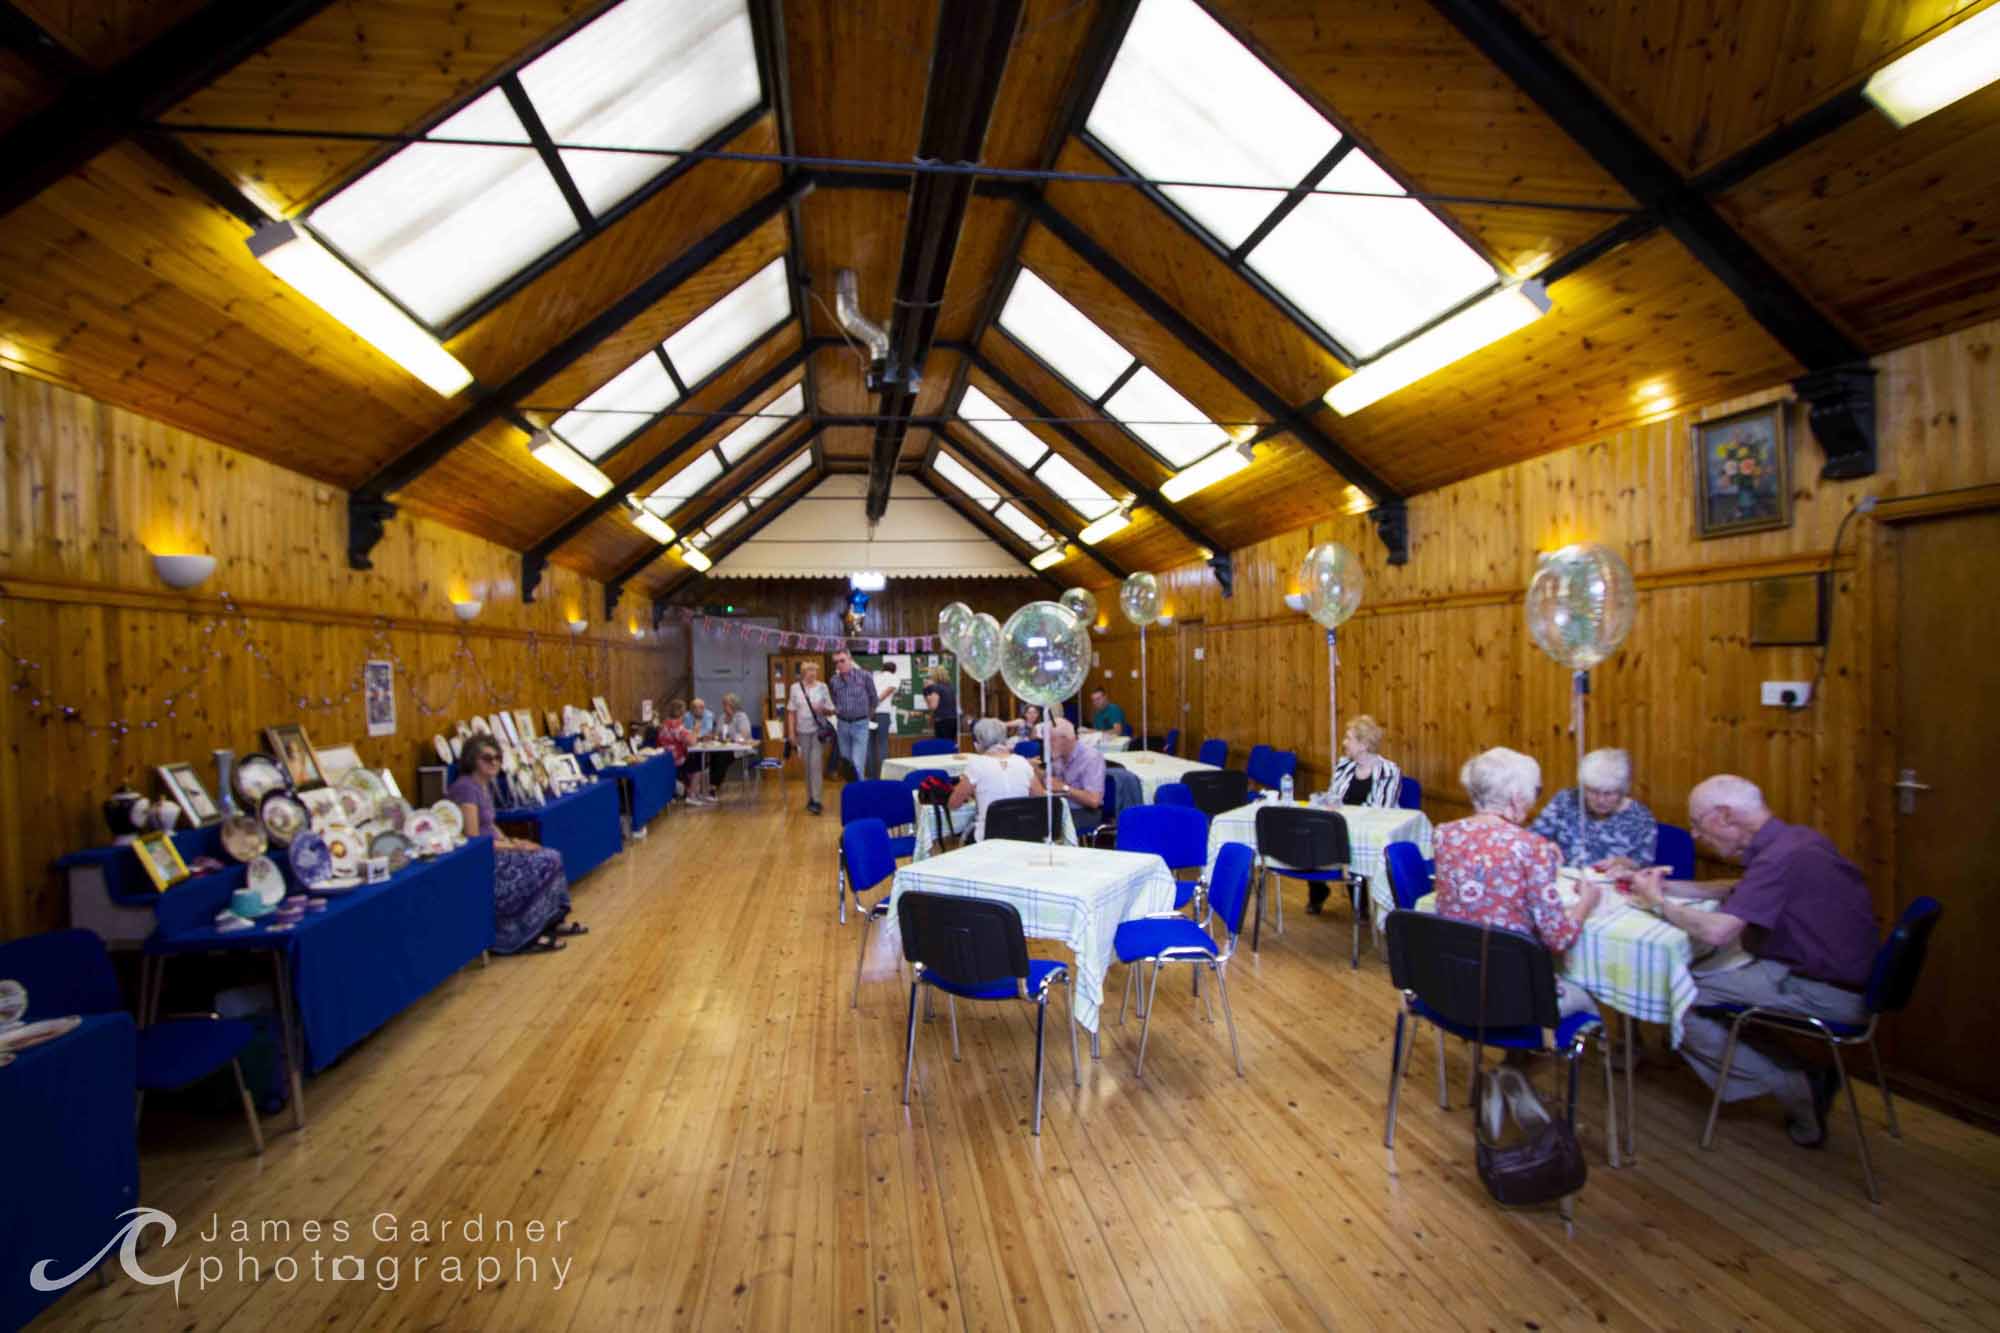 Image of the Main Hall at the Shenstone Festival 2018 